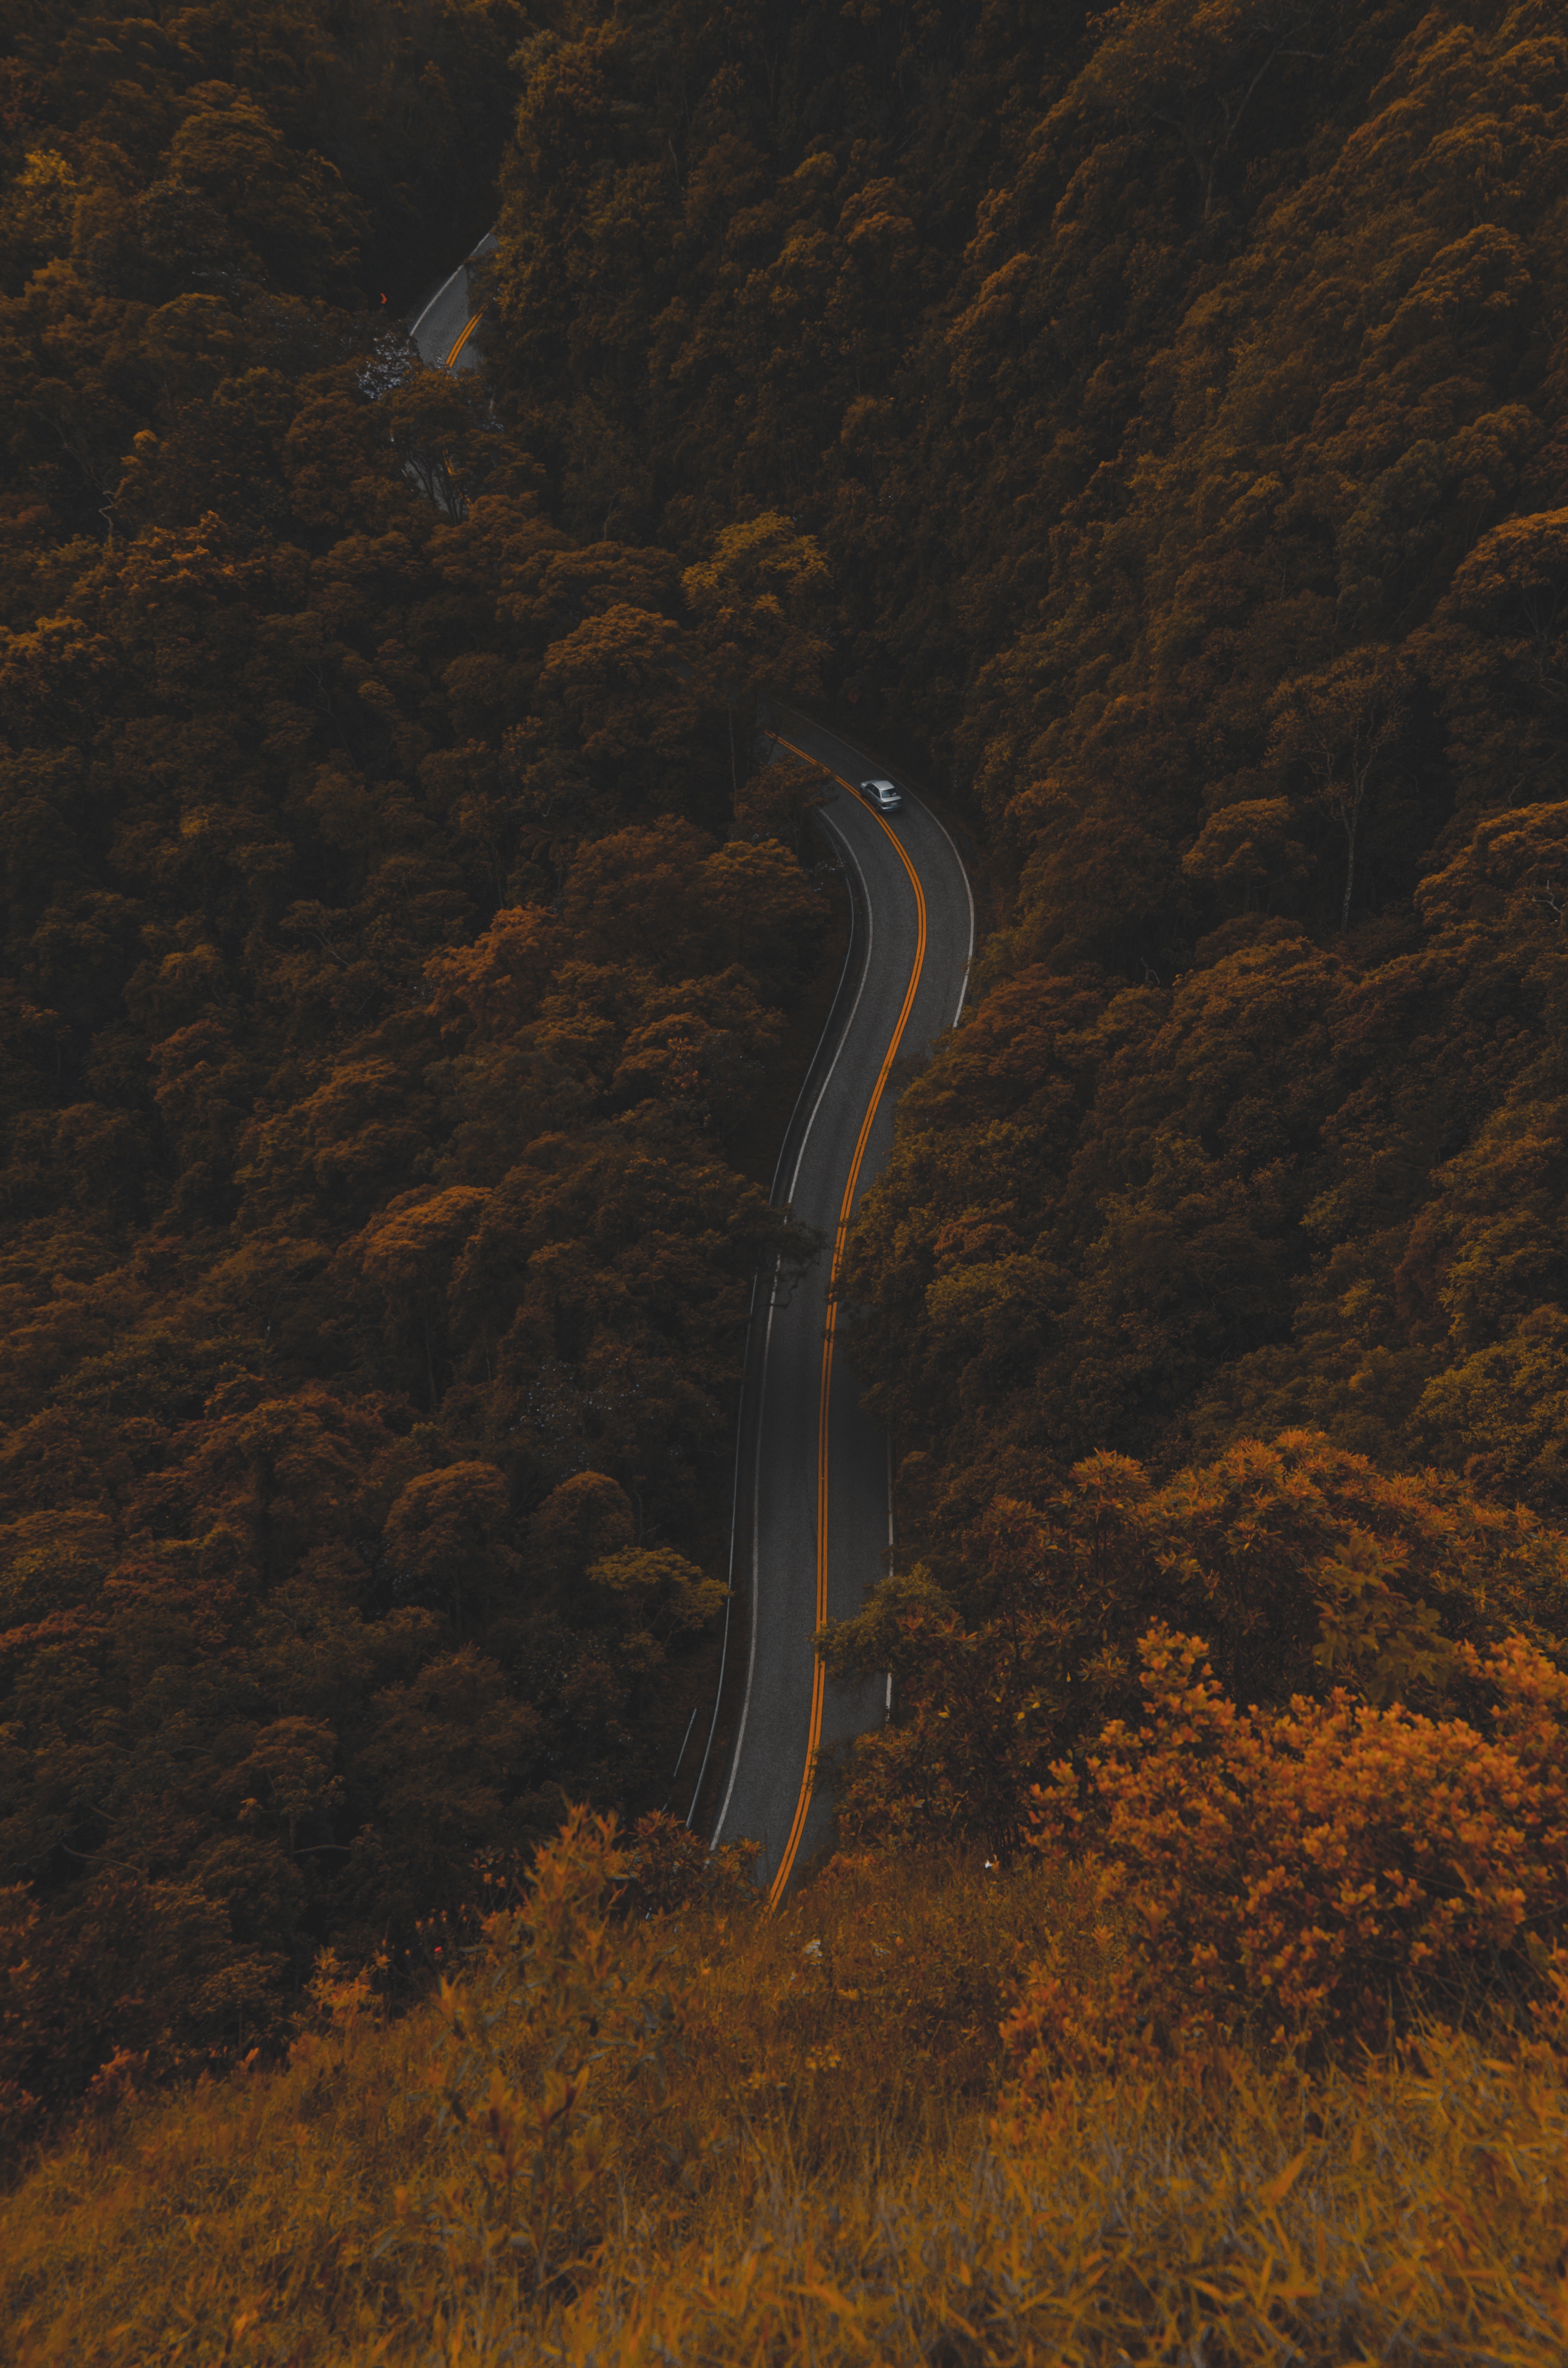 foliage, nature, autumn, view from above, road, forest